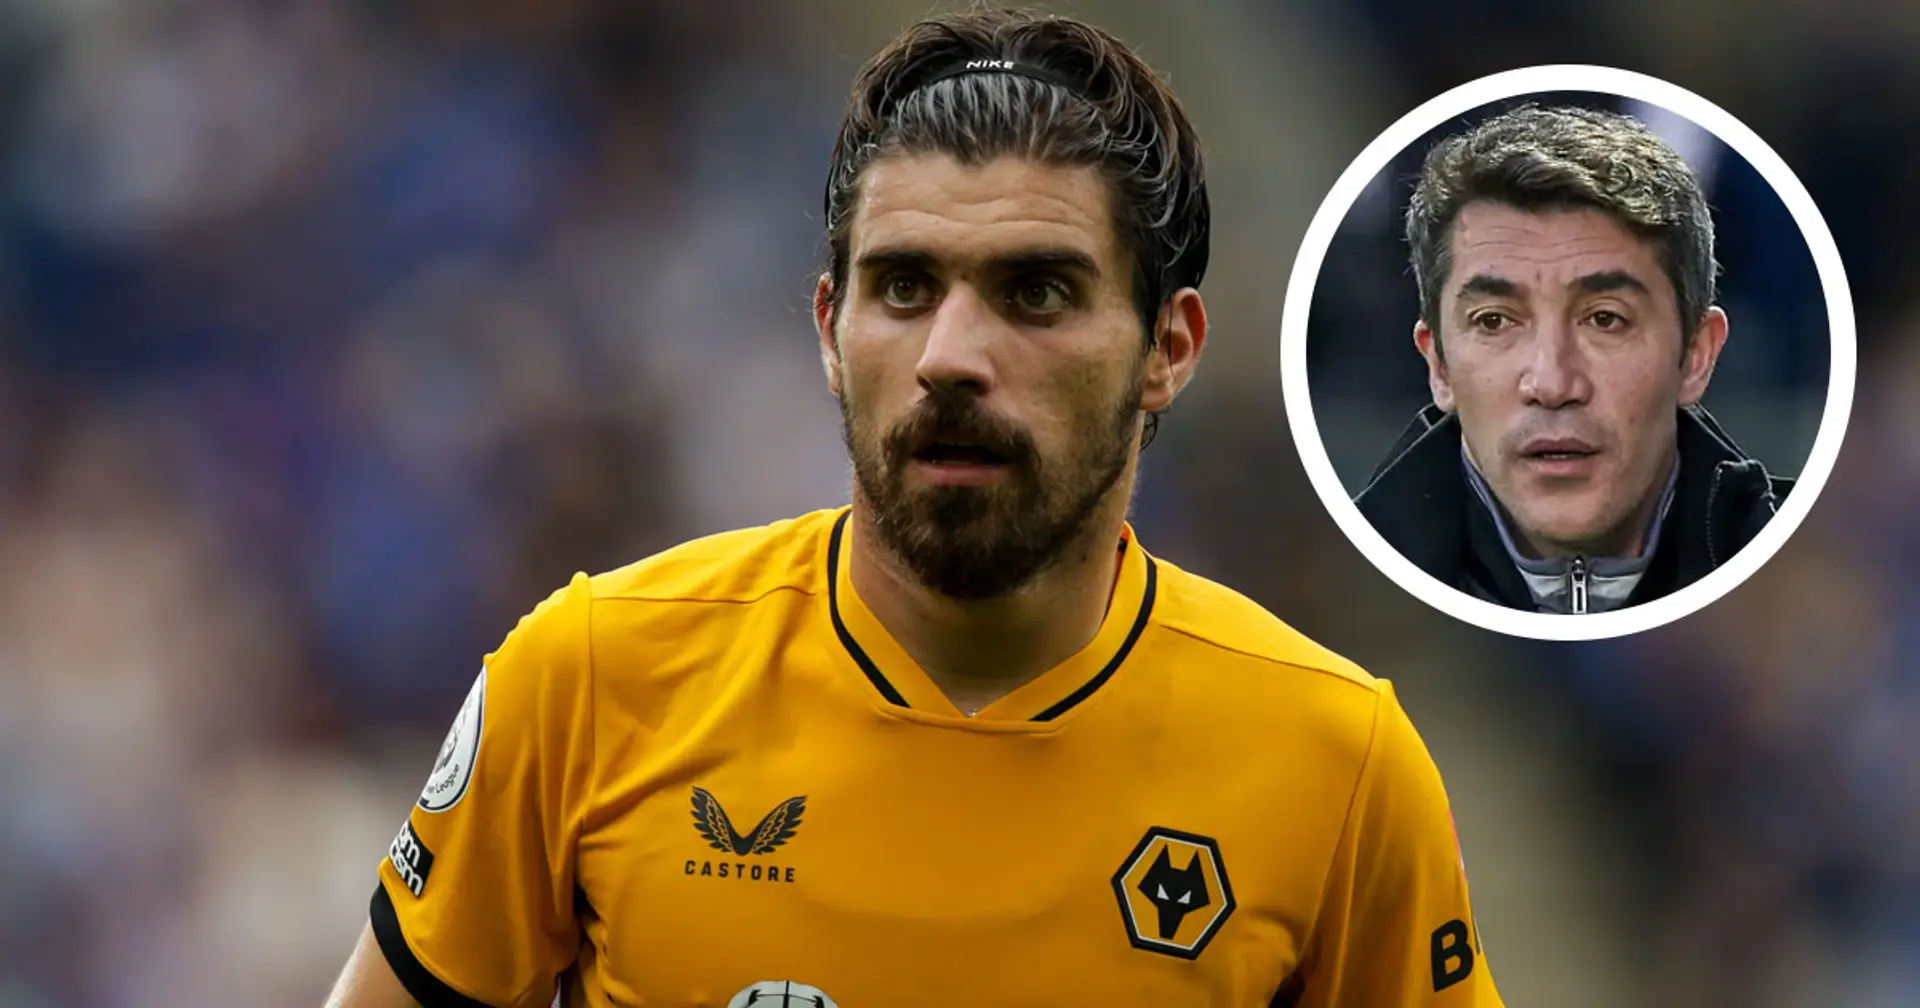 Wolves boss Bruno Lage opens up on Ruben Neves' future amid United links